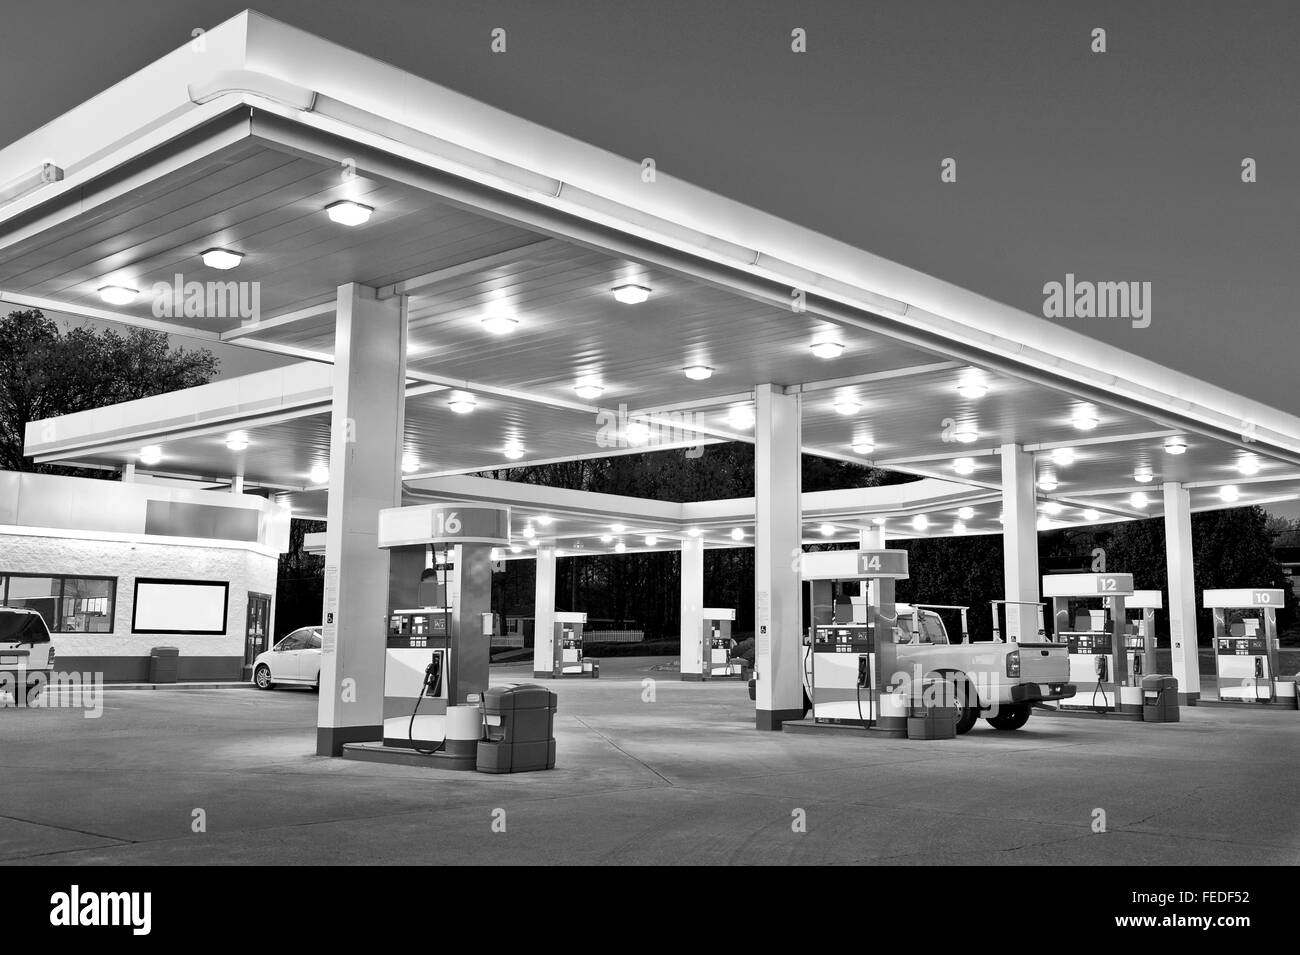 Black and White Retail Gasoline Station and Convenience Store Stock Photo